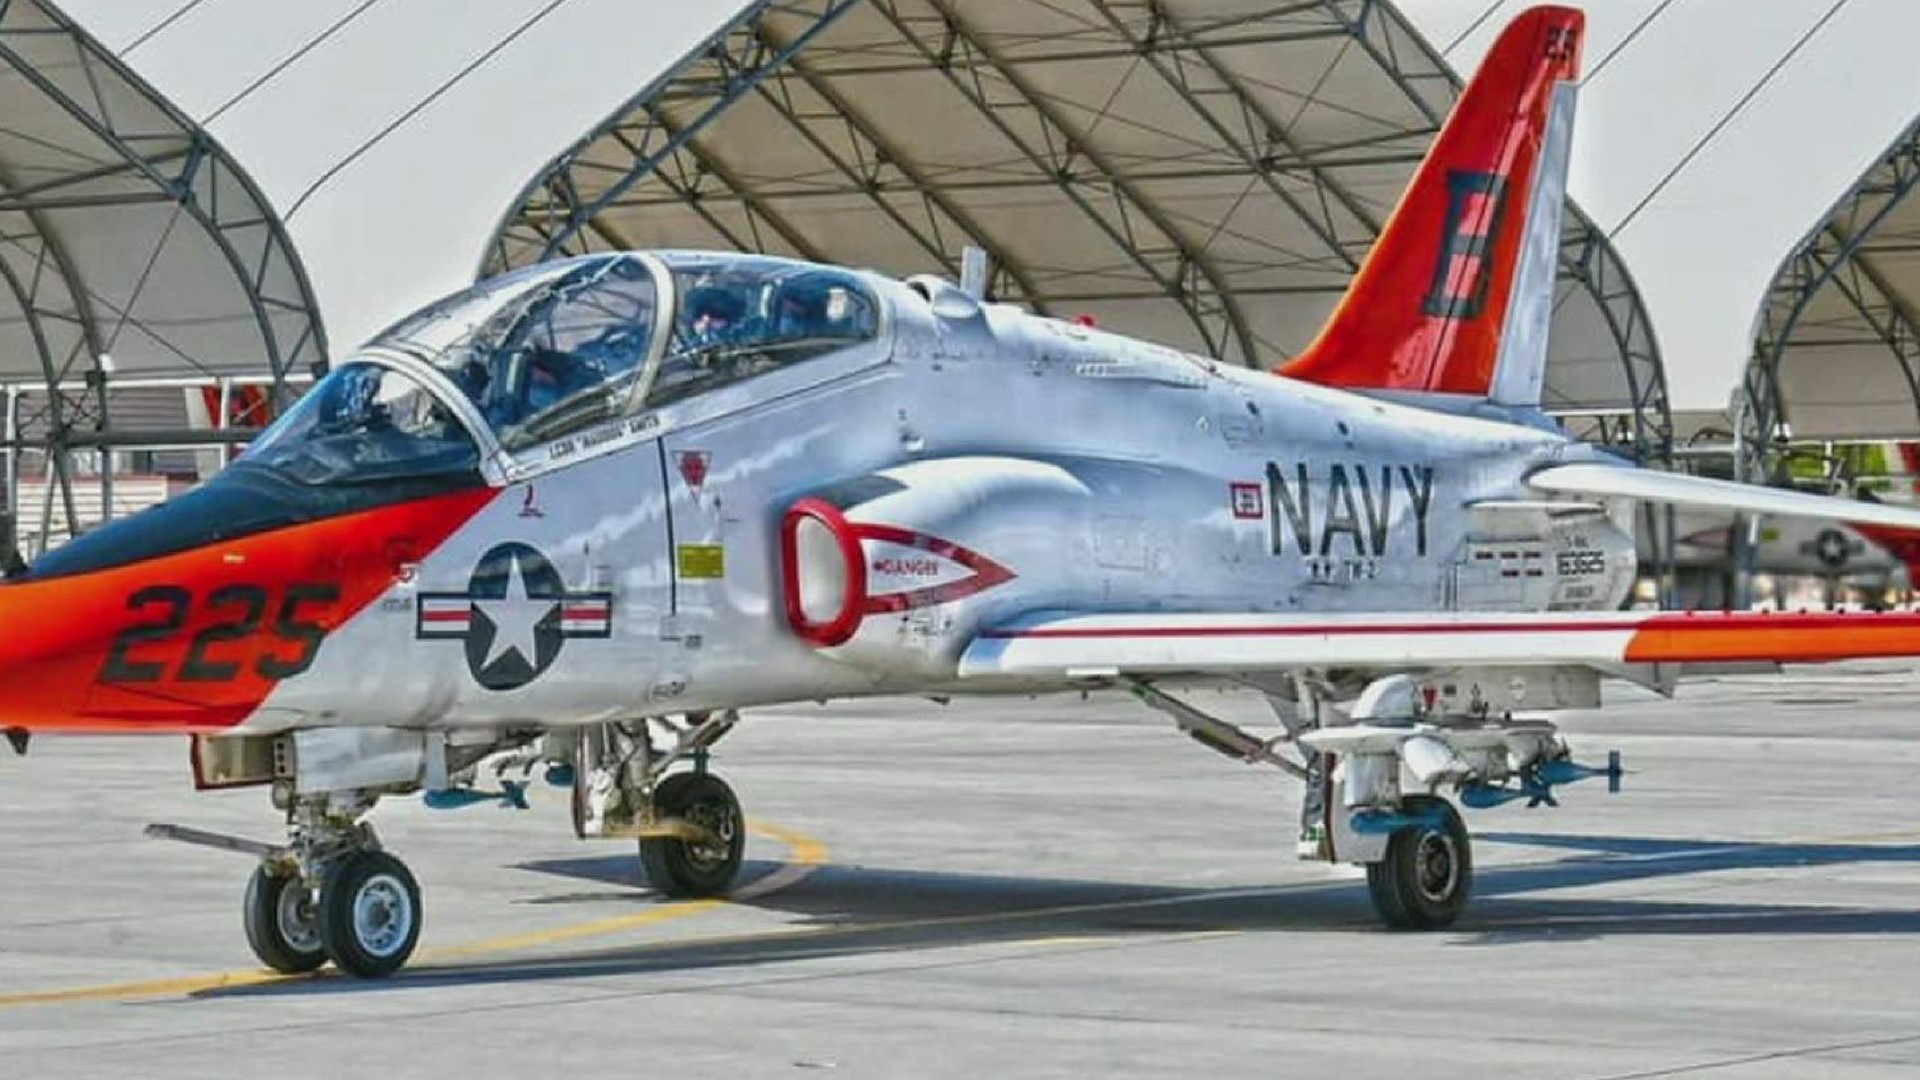 The T-45 Goshawk was approaching NAS Kingsville when the aircraft went down in an empty field, officials said.